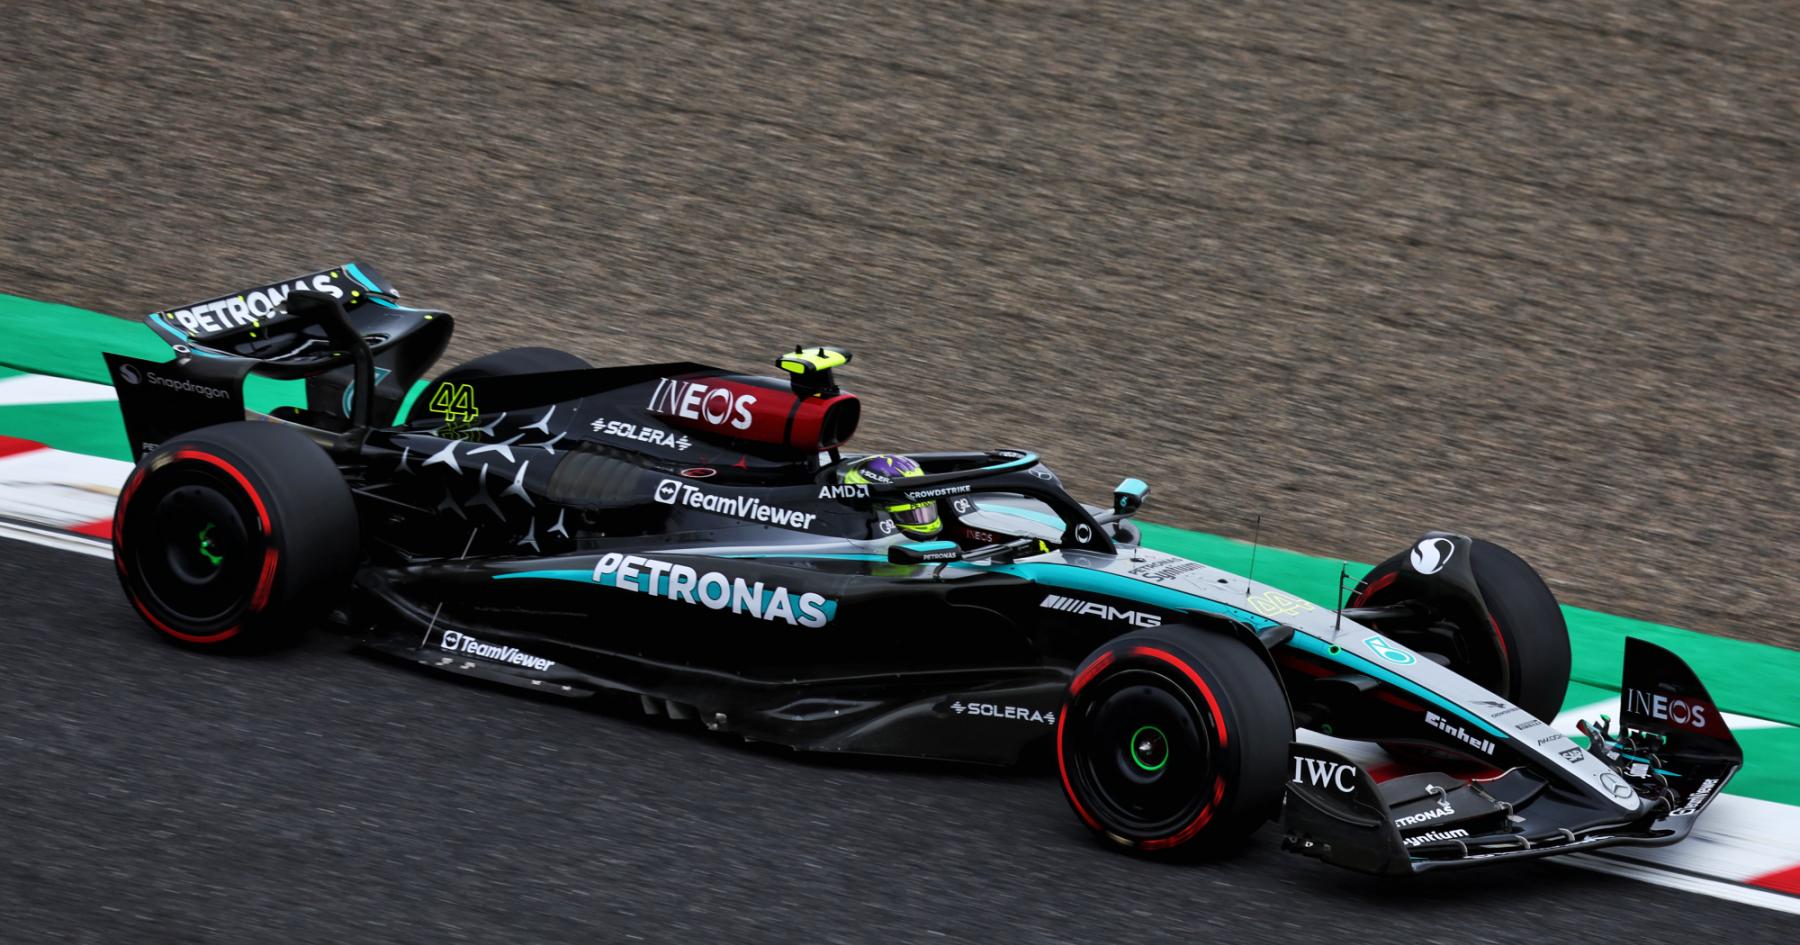 Hamilton Sets High Expectations for Mercedes: Will They Rise to the Challenge?